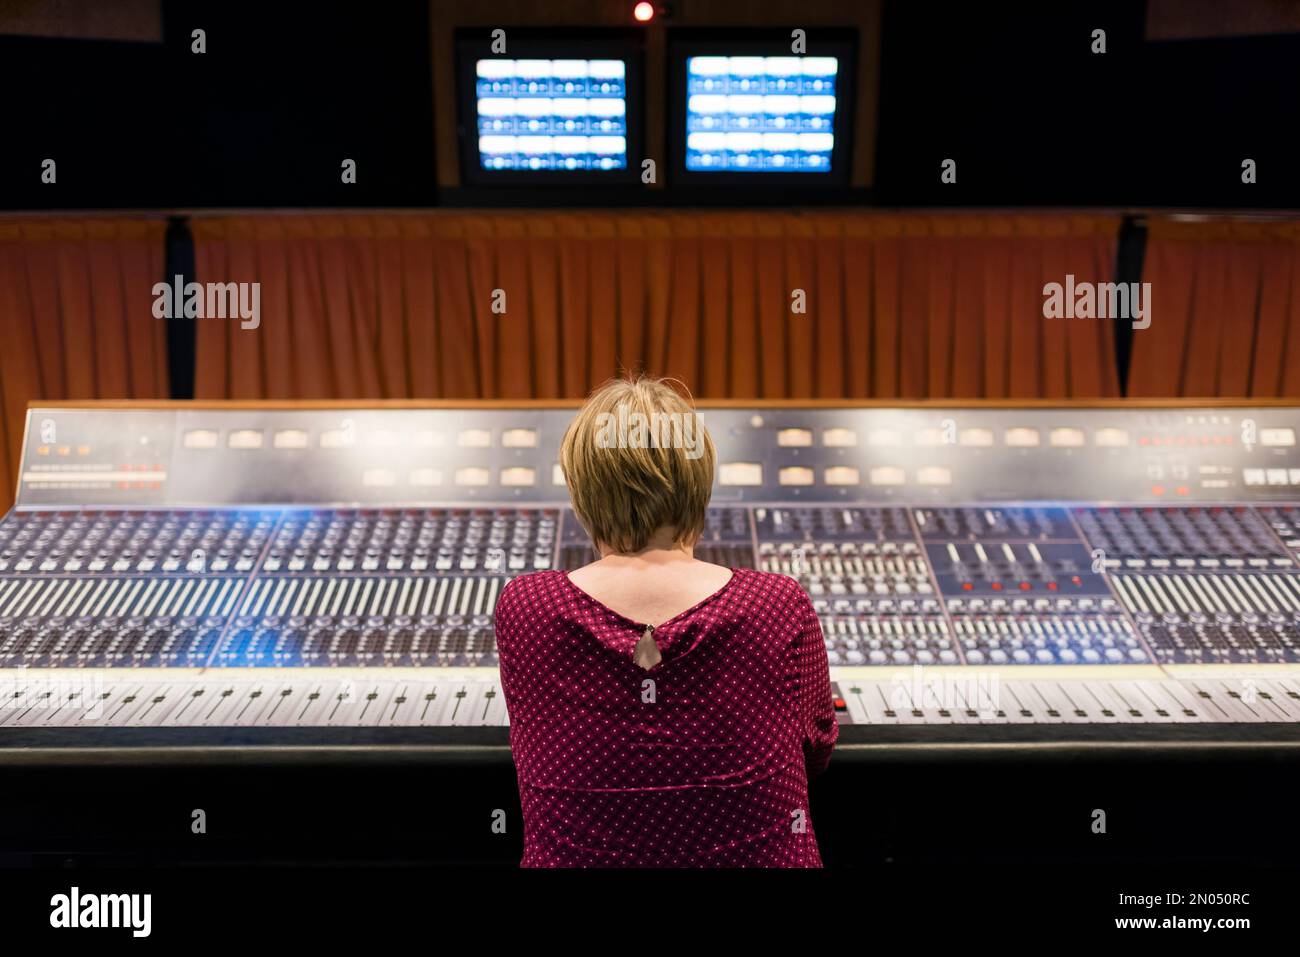 A woman is sitting in a professional analog vintage audio recording studio. Picture taken at the Mountain View Studio at Montreux, Switzerland. Stock Photo